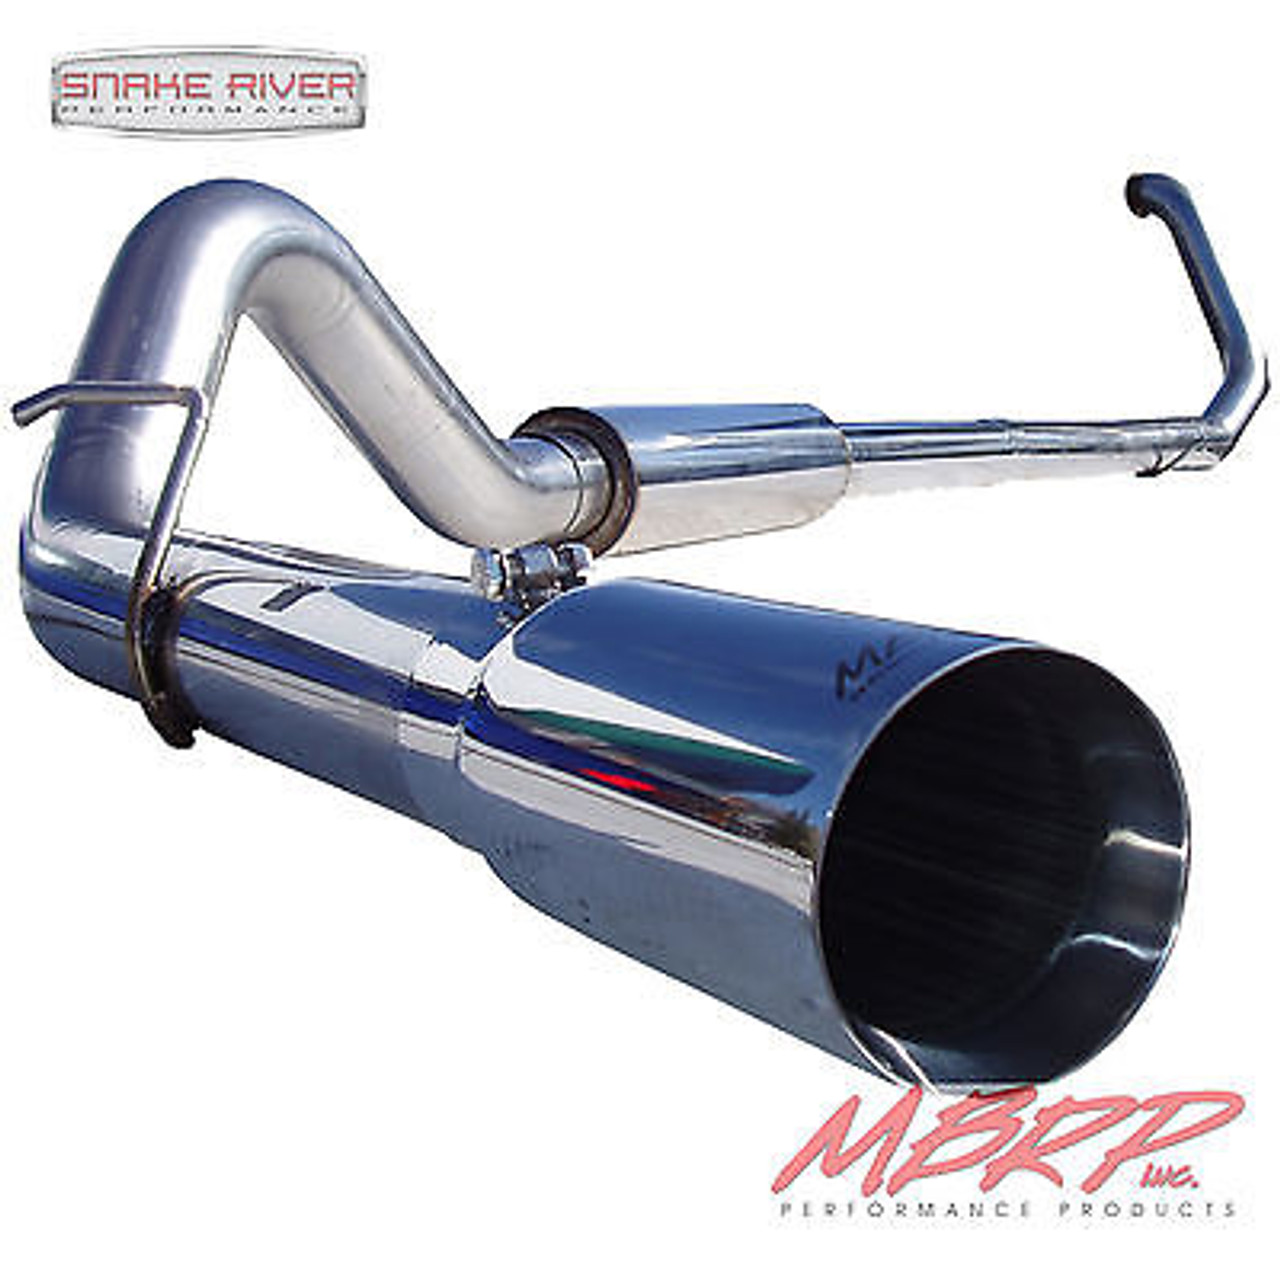 S6200304 - MBRP 4" TURBO BACK T304 STAINLESS EXHAUST 99-03 FORD POWERSTROKE DIESEL 7.3L